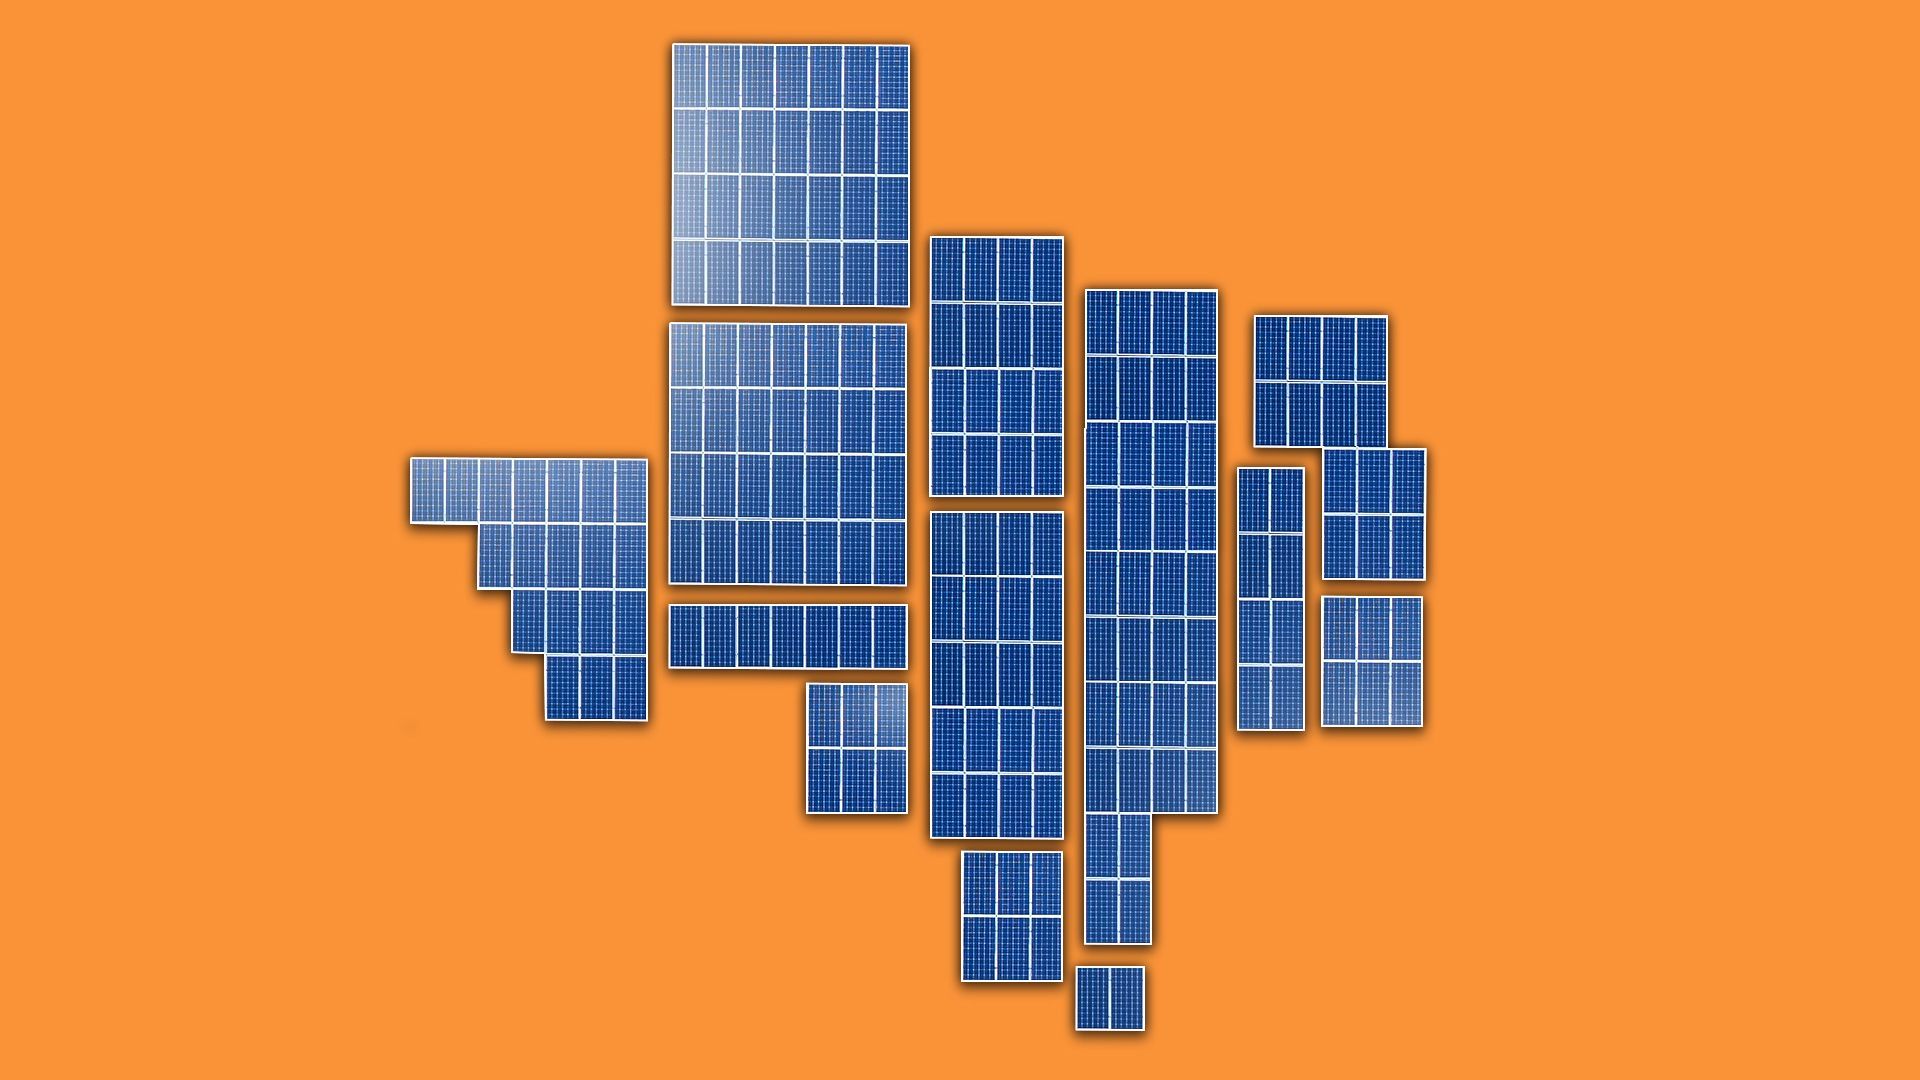 Illustration of solar panels in the shape of Texas